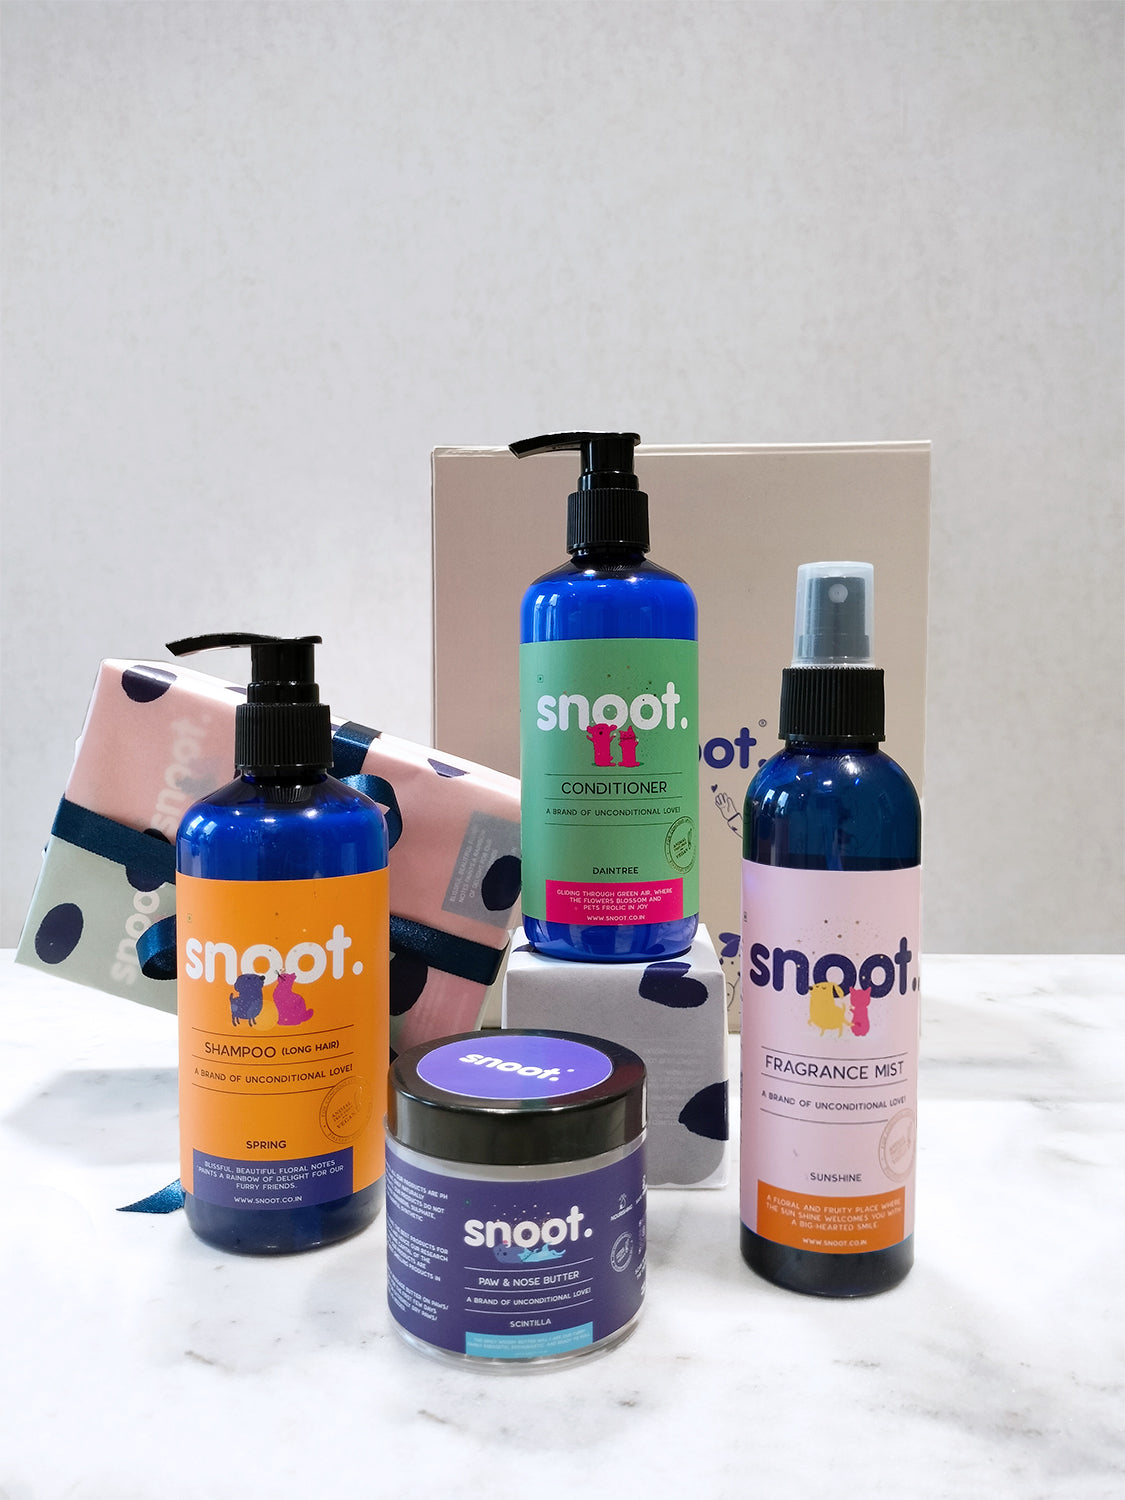 Gift set for pets, dogs and cats featuring a pet shampoo, pet conditioner, fragrance mist, and paw and nose butter